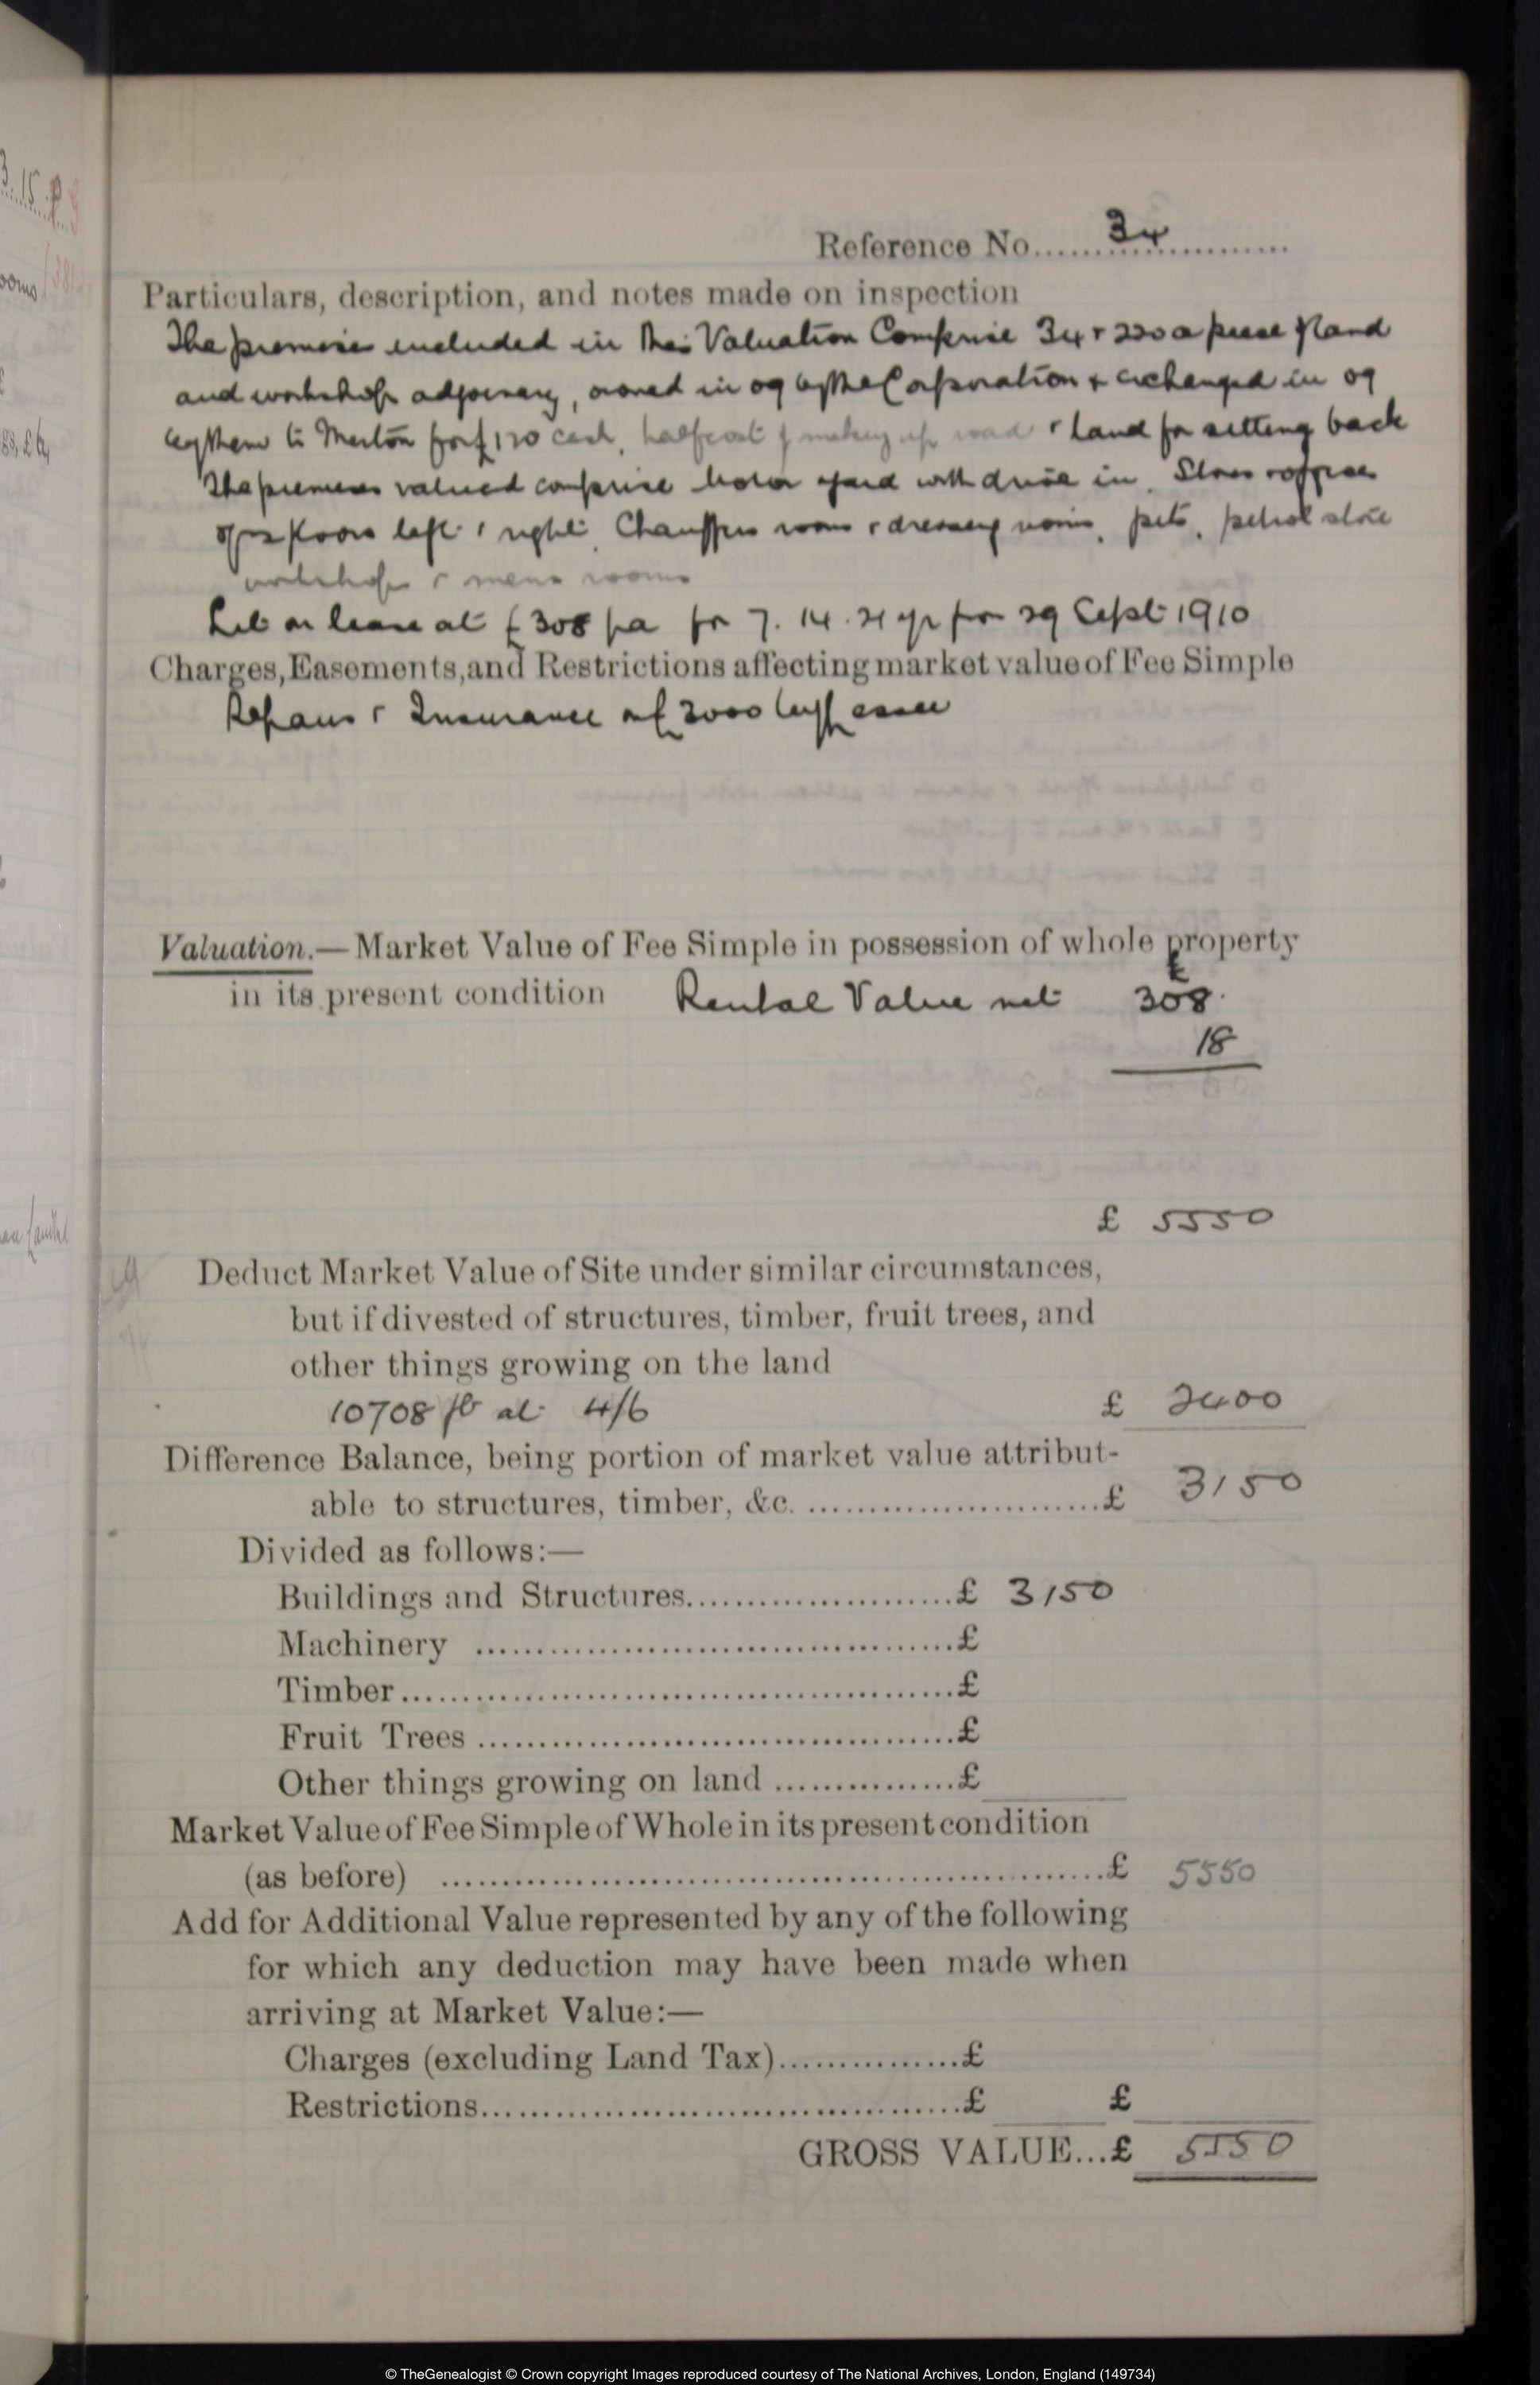 The IR58 Field Book for the new Morris Garage found in the Lloyd George Domesday Survey on TheGenealogist with a description for the new Morris Garage